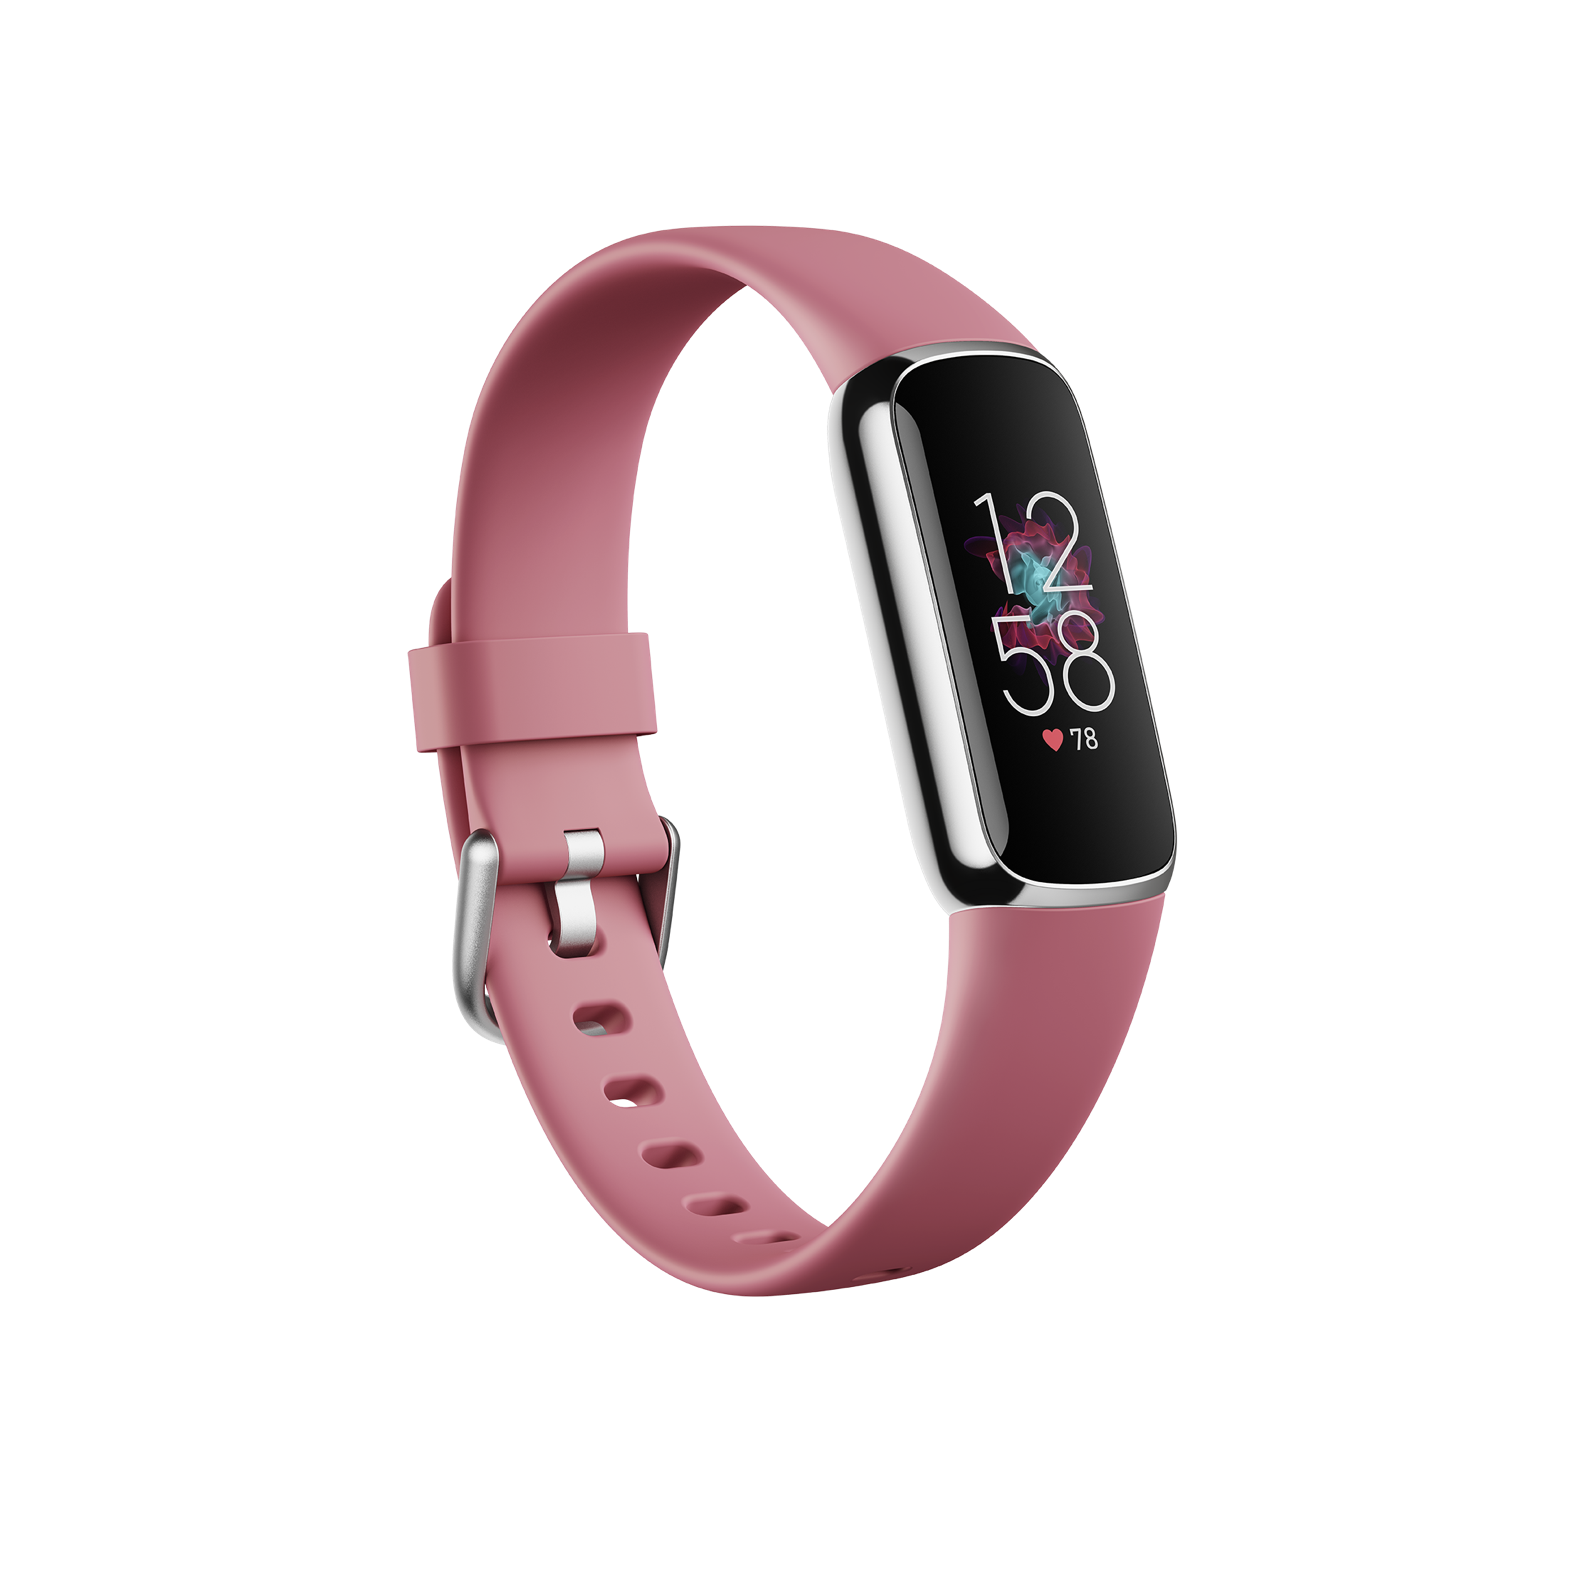 shipping them globally BEST PRICE GUARANTEE Warranty and FREE shipping Fitbit Luxe Fitness 